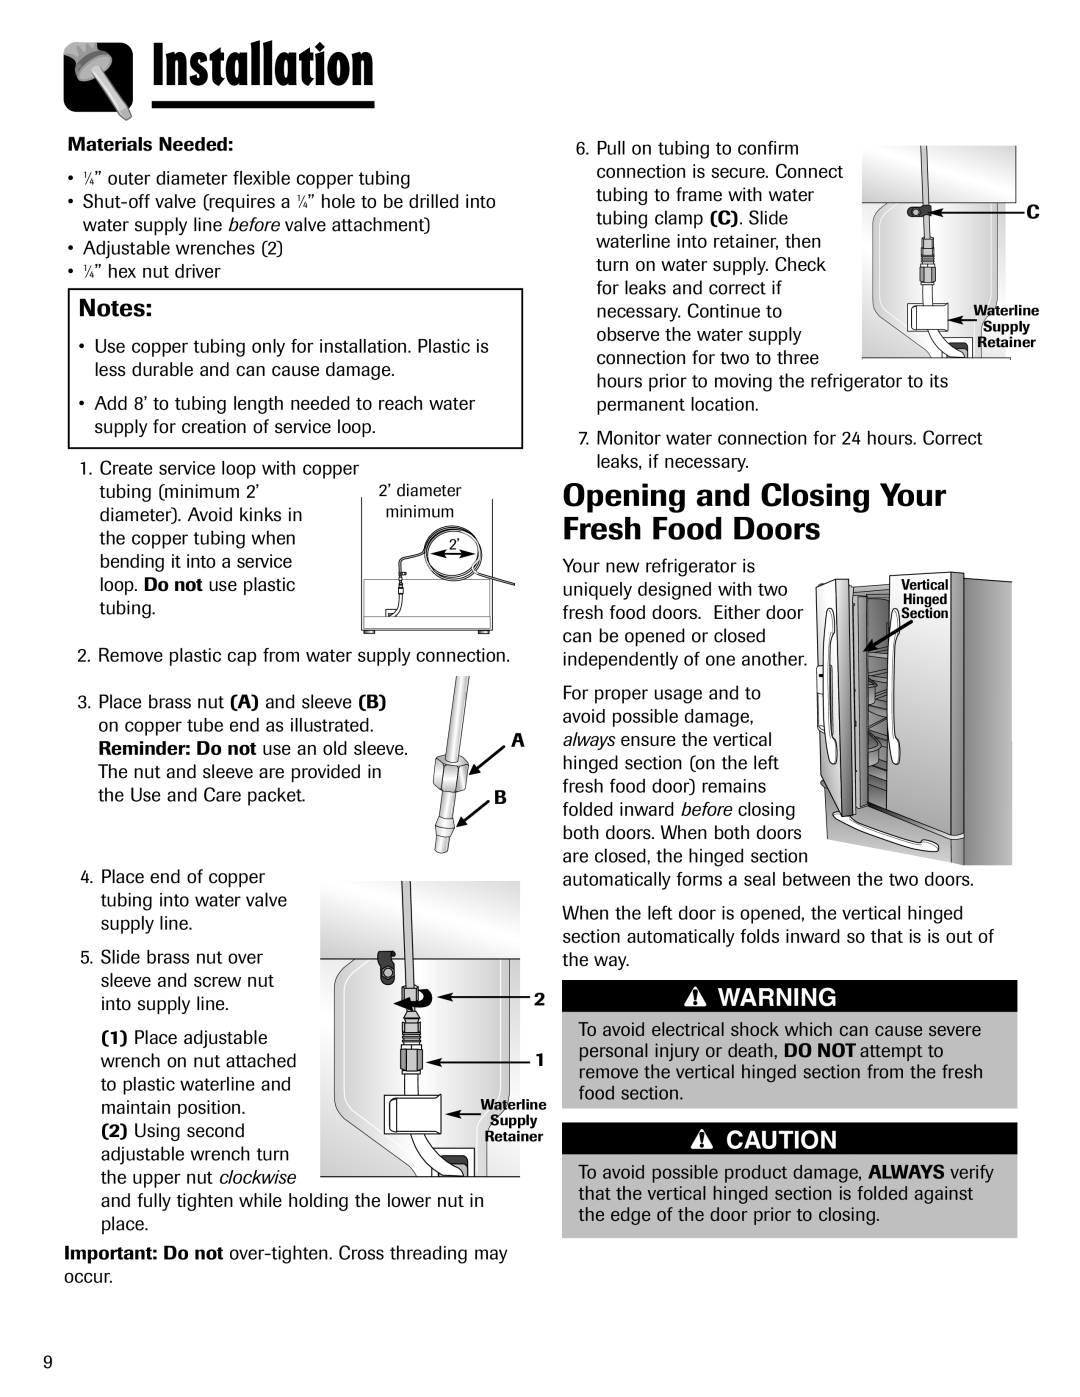 Maytag MFI2266AEW Opening and Closing Your Fresh Food Doors, Installation, loop. Do not use plastic 